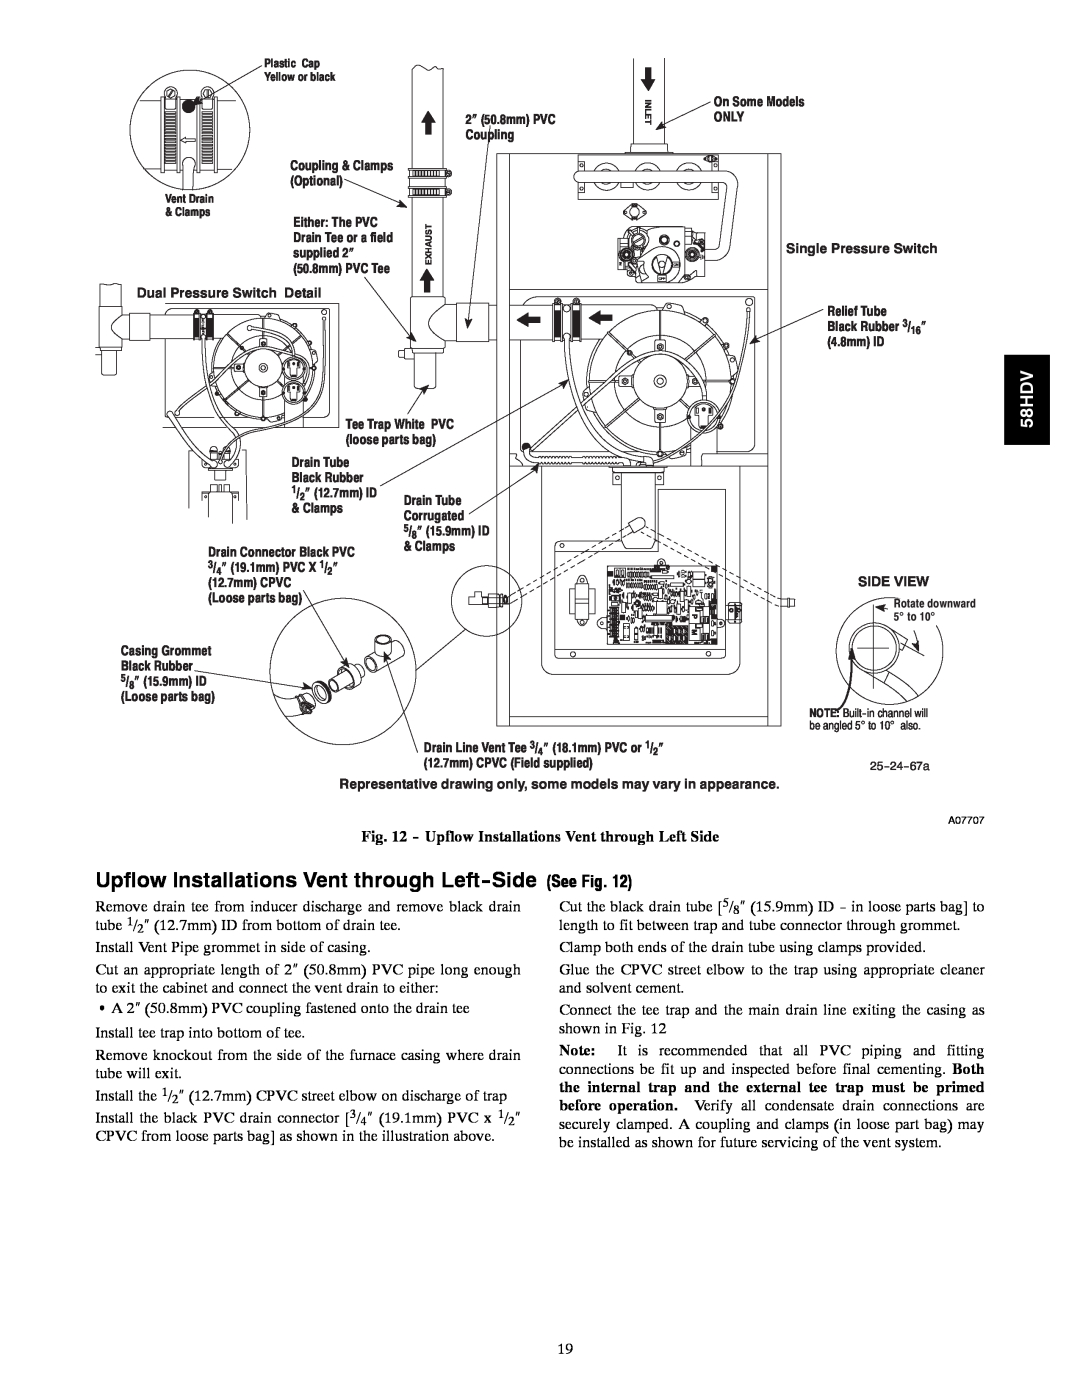 Carrier 58HDV installation instructions Install Vent Pipe grommet in side of casing 